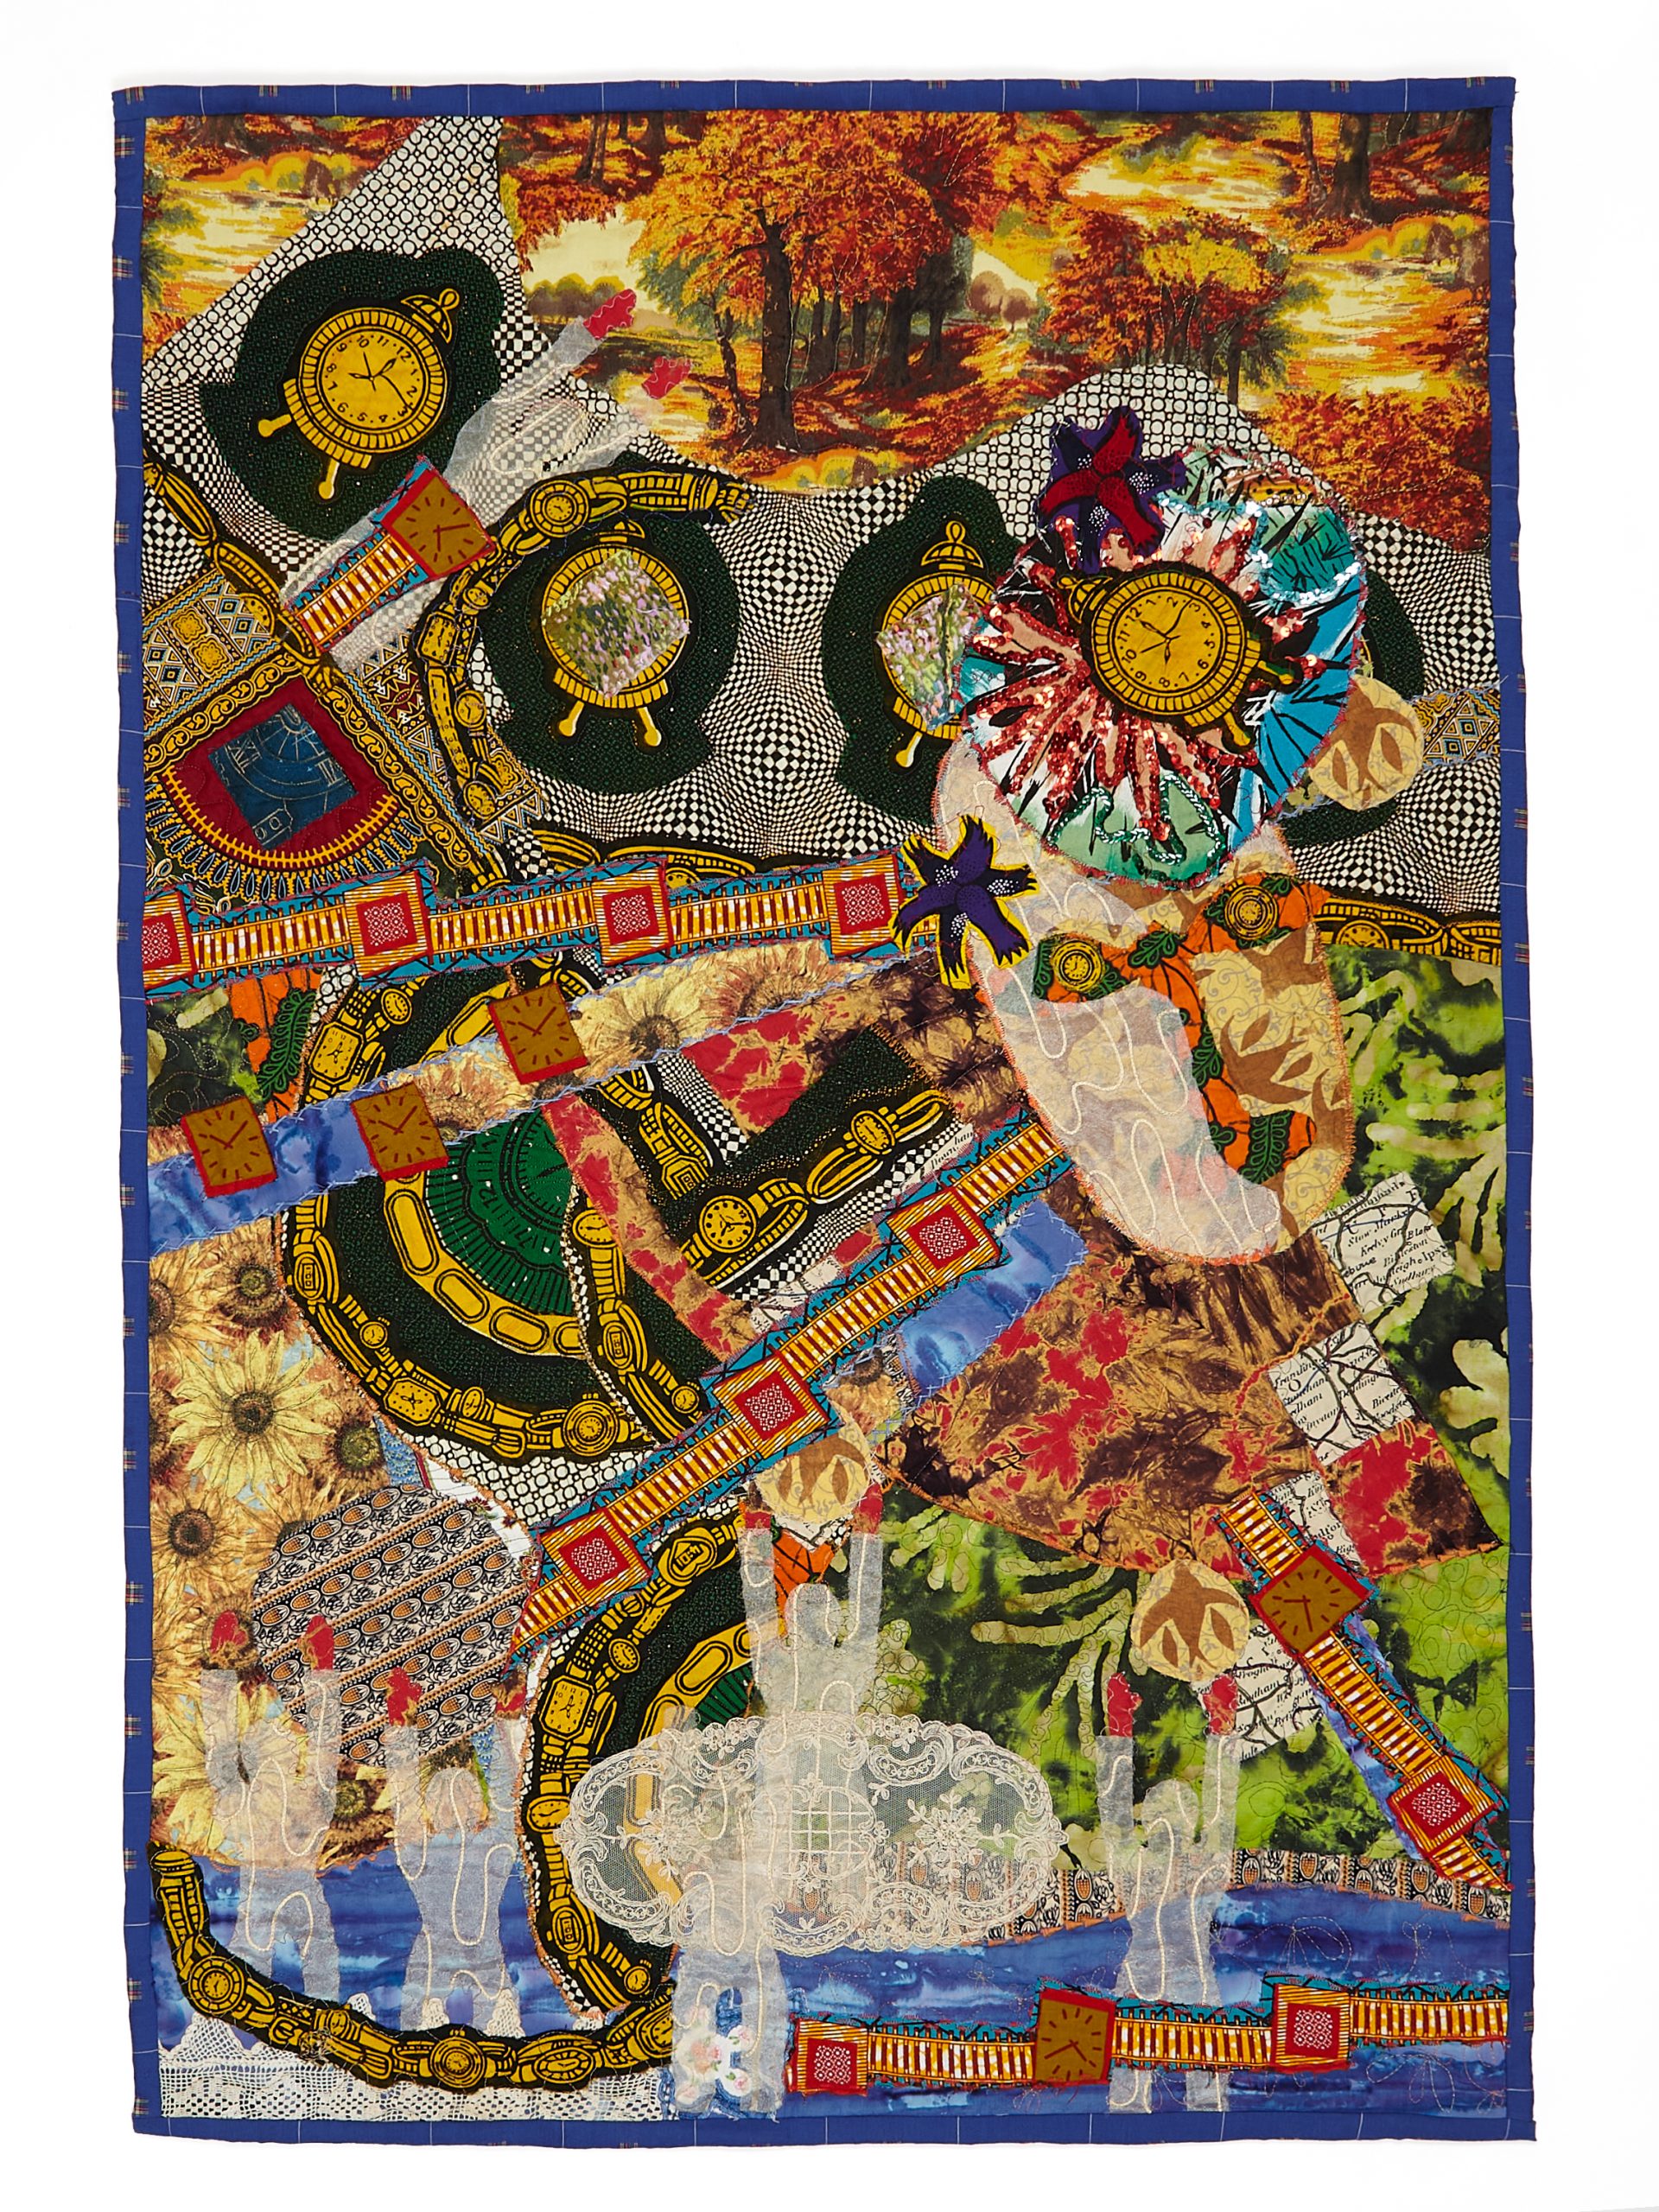 Tina Williams Brewer, 'I Come From The Root, Over Yonder', 2017, Assorted fabrics and threads, 45.5 x 30 in 115.6 x 76.2 cm. Courtesy De Buck Gallery